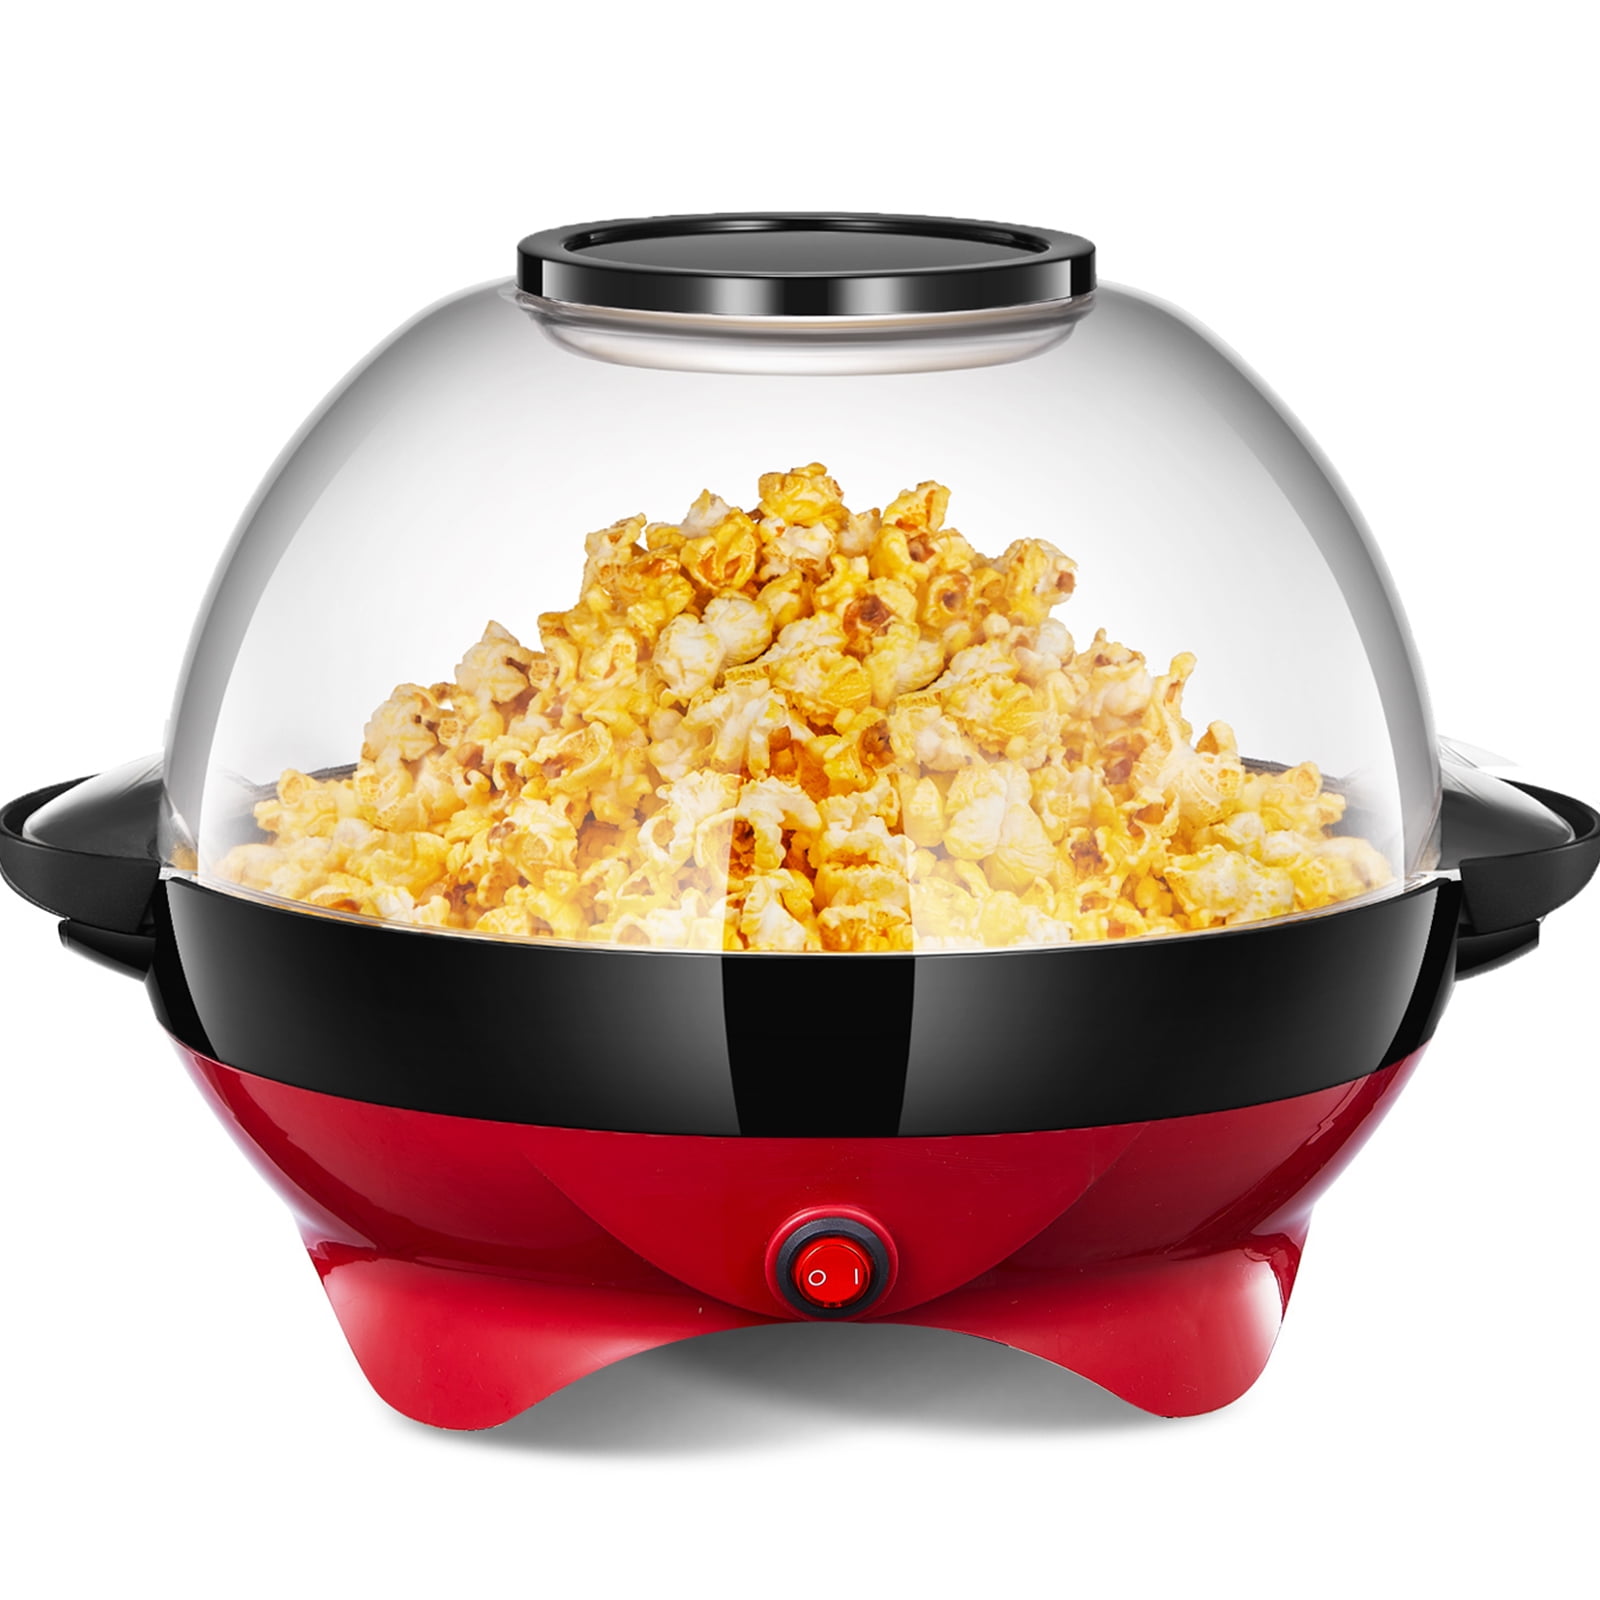 Litake Kitchen Large Microwave Popcorn Maker Hot-Oil Popcorn Popper Maker with Nonstick Plate & Stirring Rod Large Lid for Serving Bowl and Two Me